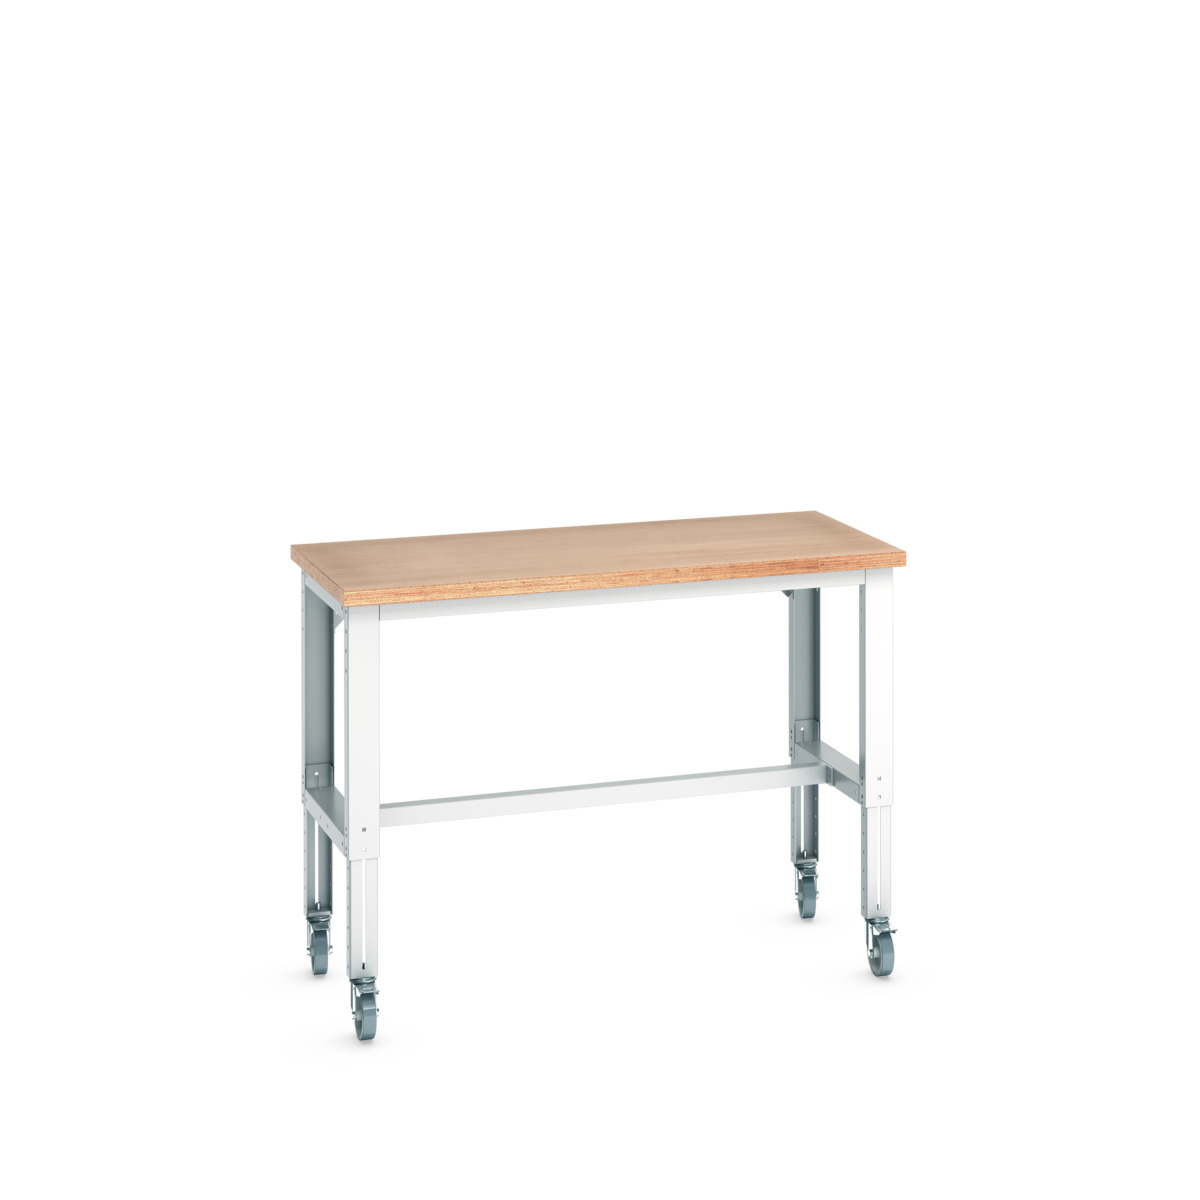 41003283.16V - cubio mobile bench adj height (mpx)